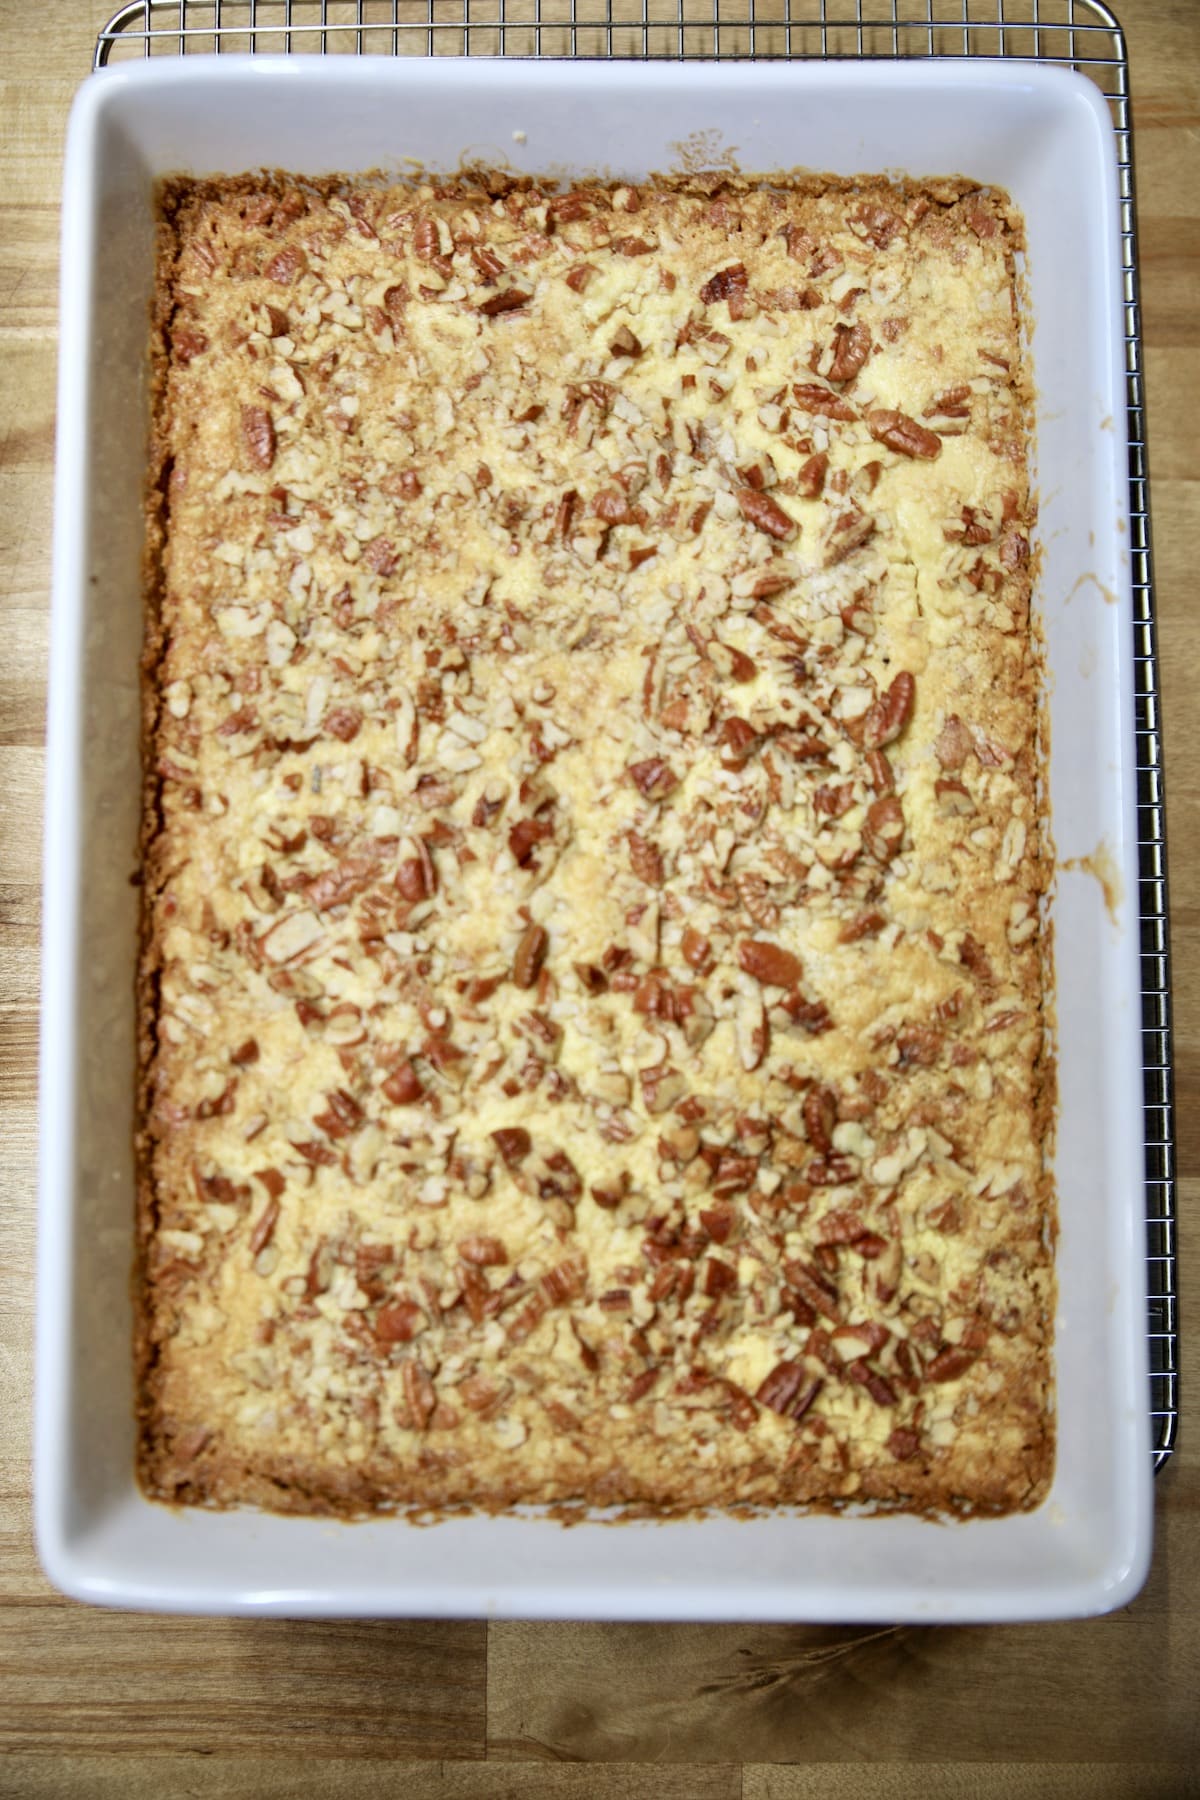 Baked pumpkin pie cake with pecans in a 9 x 13 inch pan.